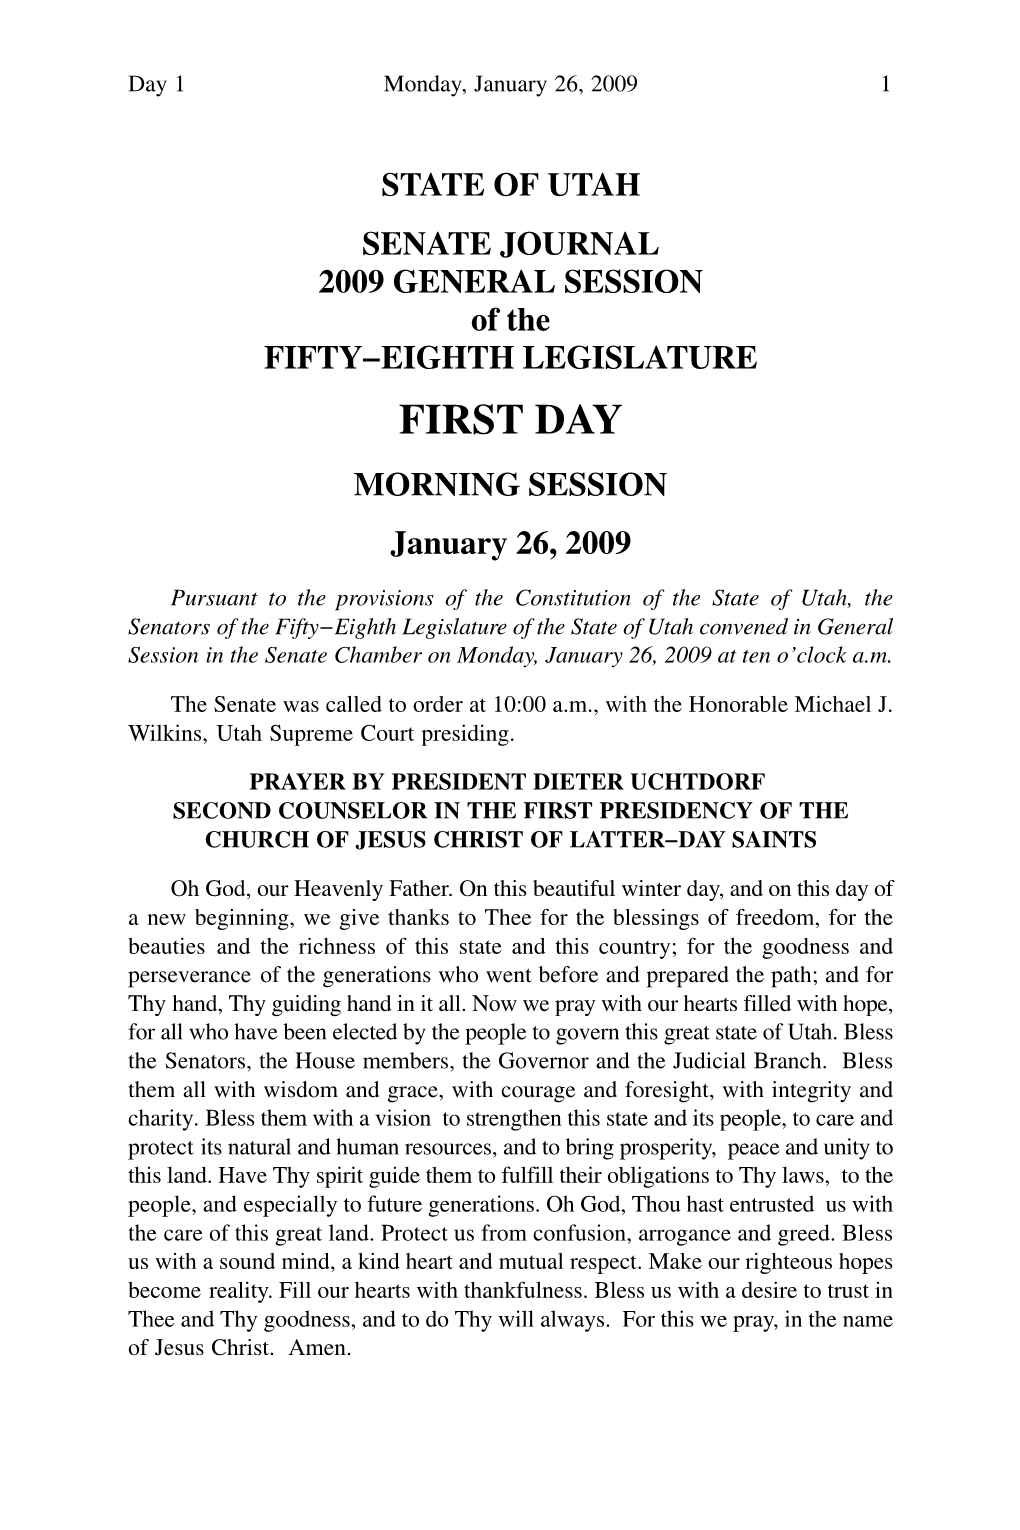 FIRST DAY MORNING SESSION January 26, 2009